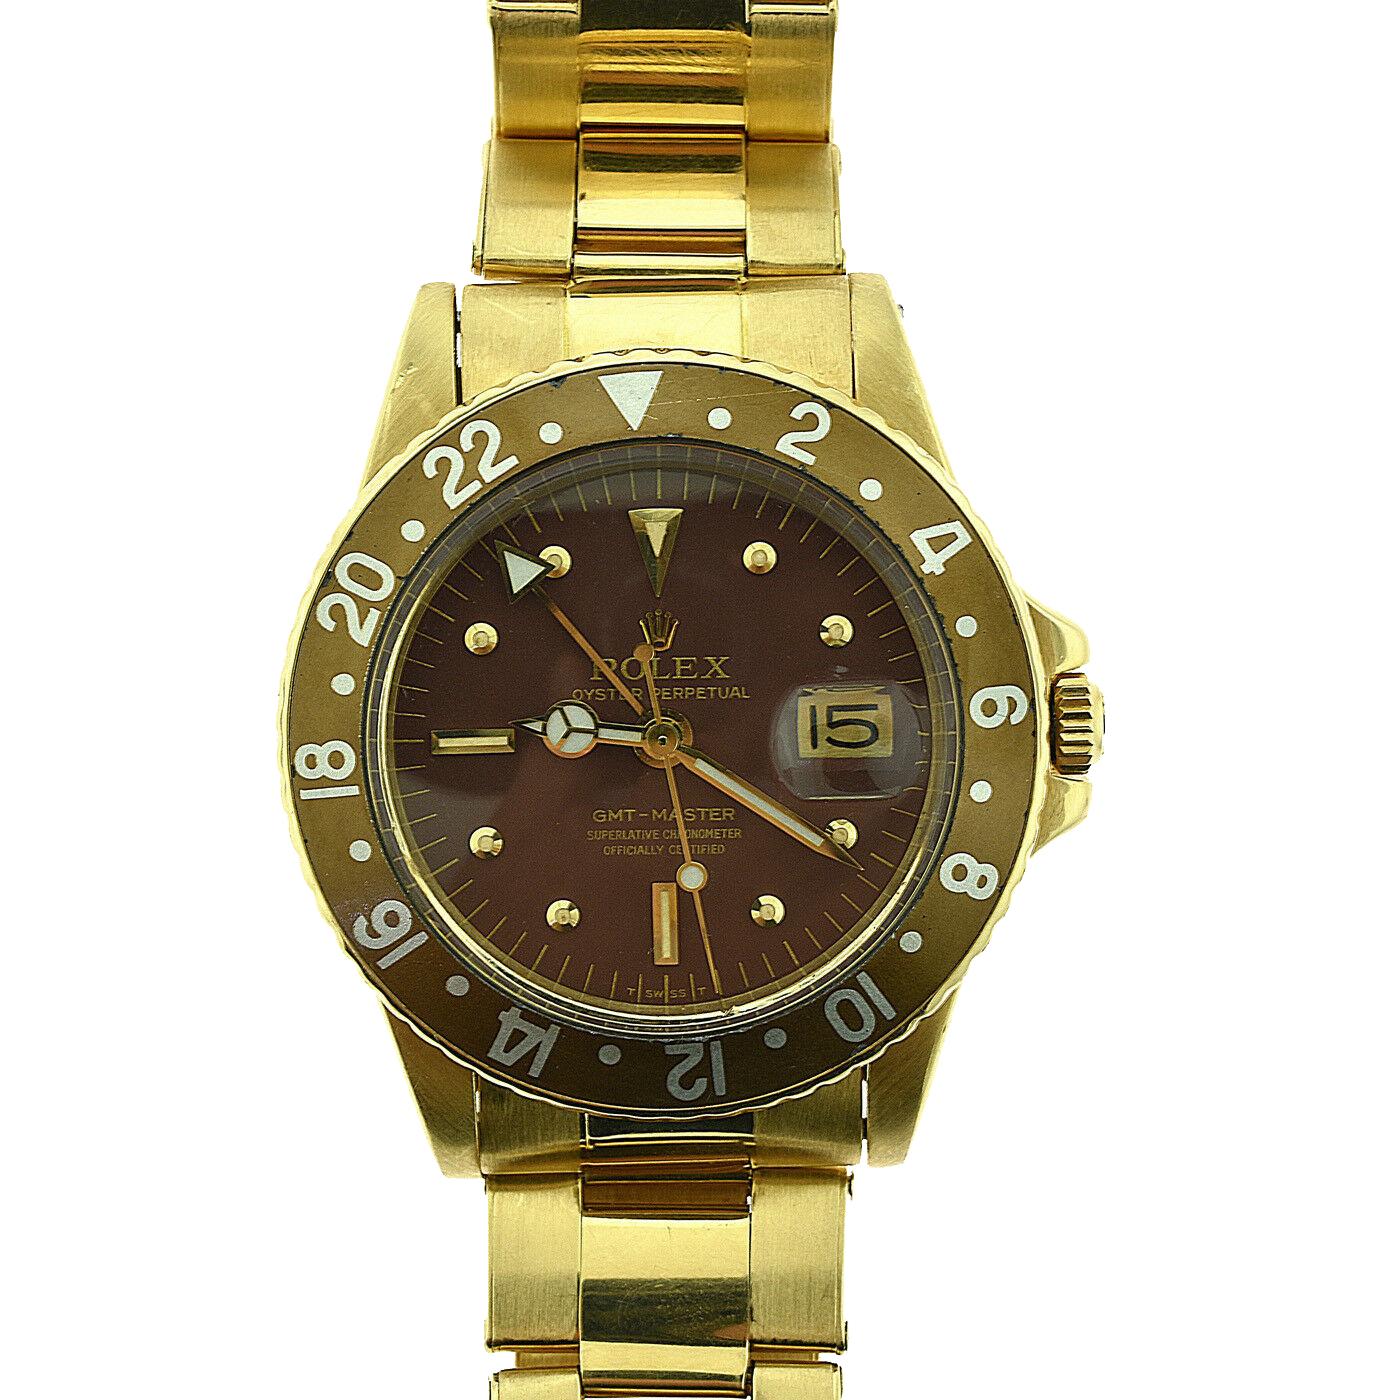 Brand: Rolex

Model Name: GMT - Master

Model Number: 1675

Movement: Self-Winding Manual Winding

Case Size: 40 mm

Case Material: 18k Yellow Gold

Dial Color: Chocolate Brown 